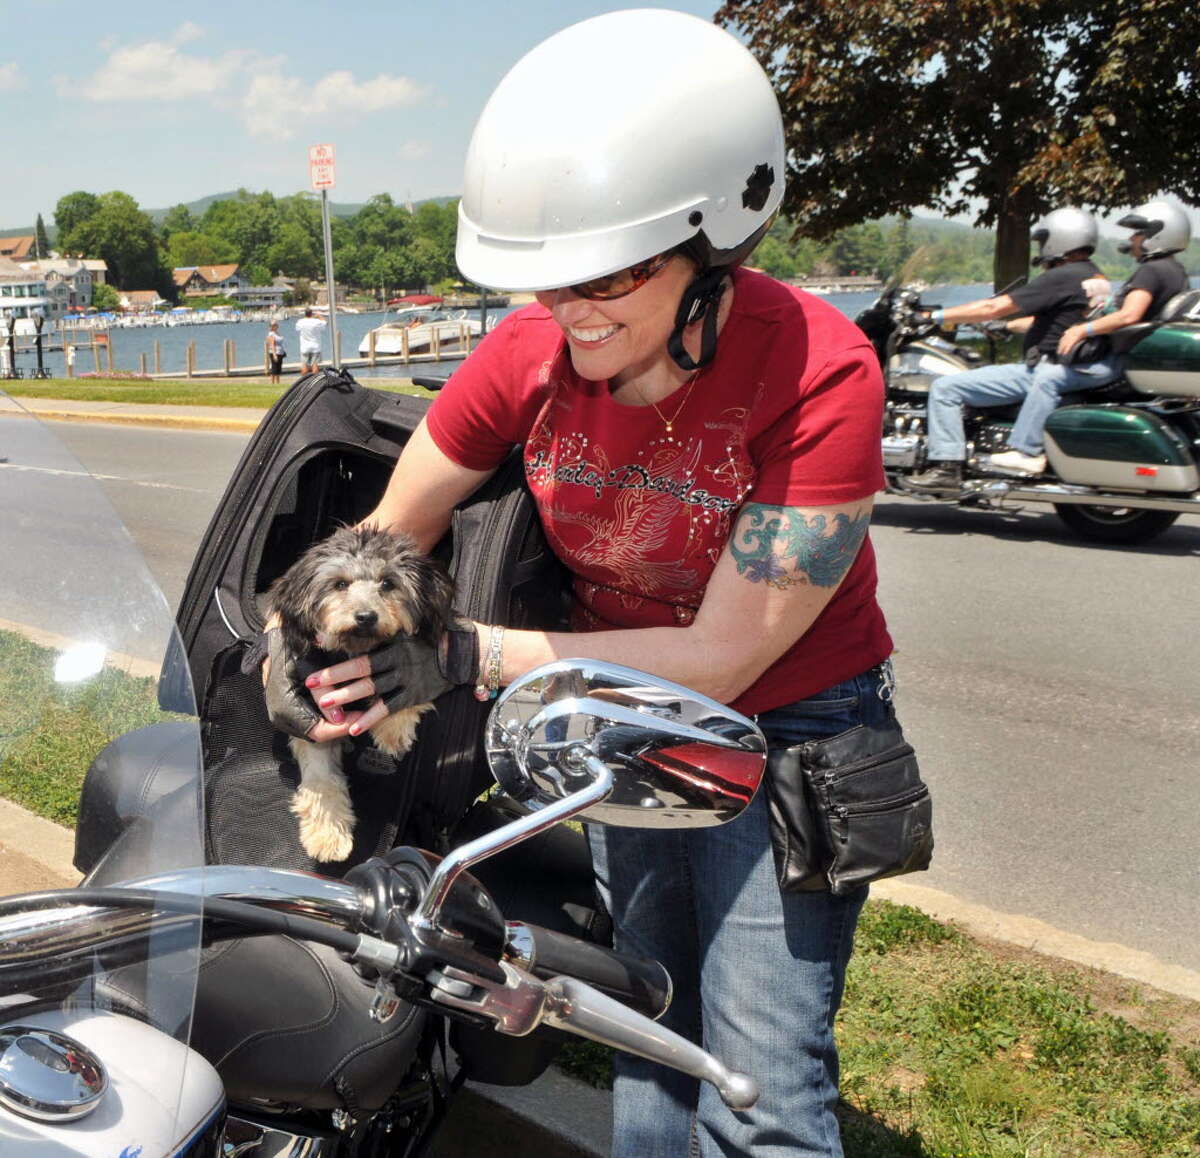 Motorcyclist Michelle Gonsalves of South Paris, Maine fill tucks h
er 6-month-old puppy 